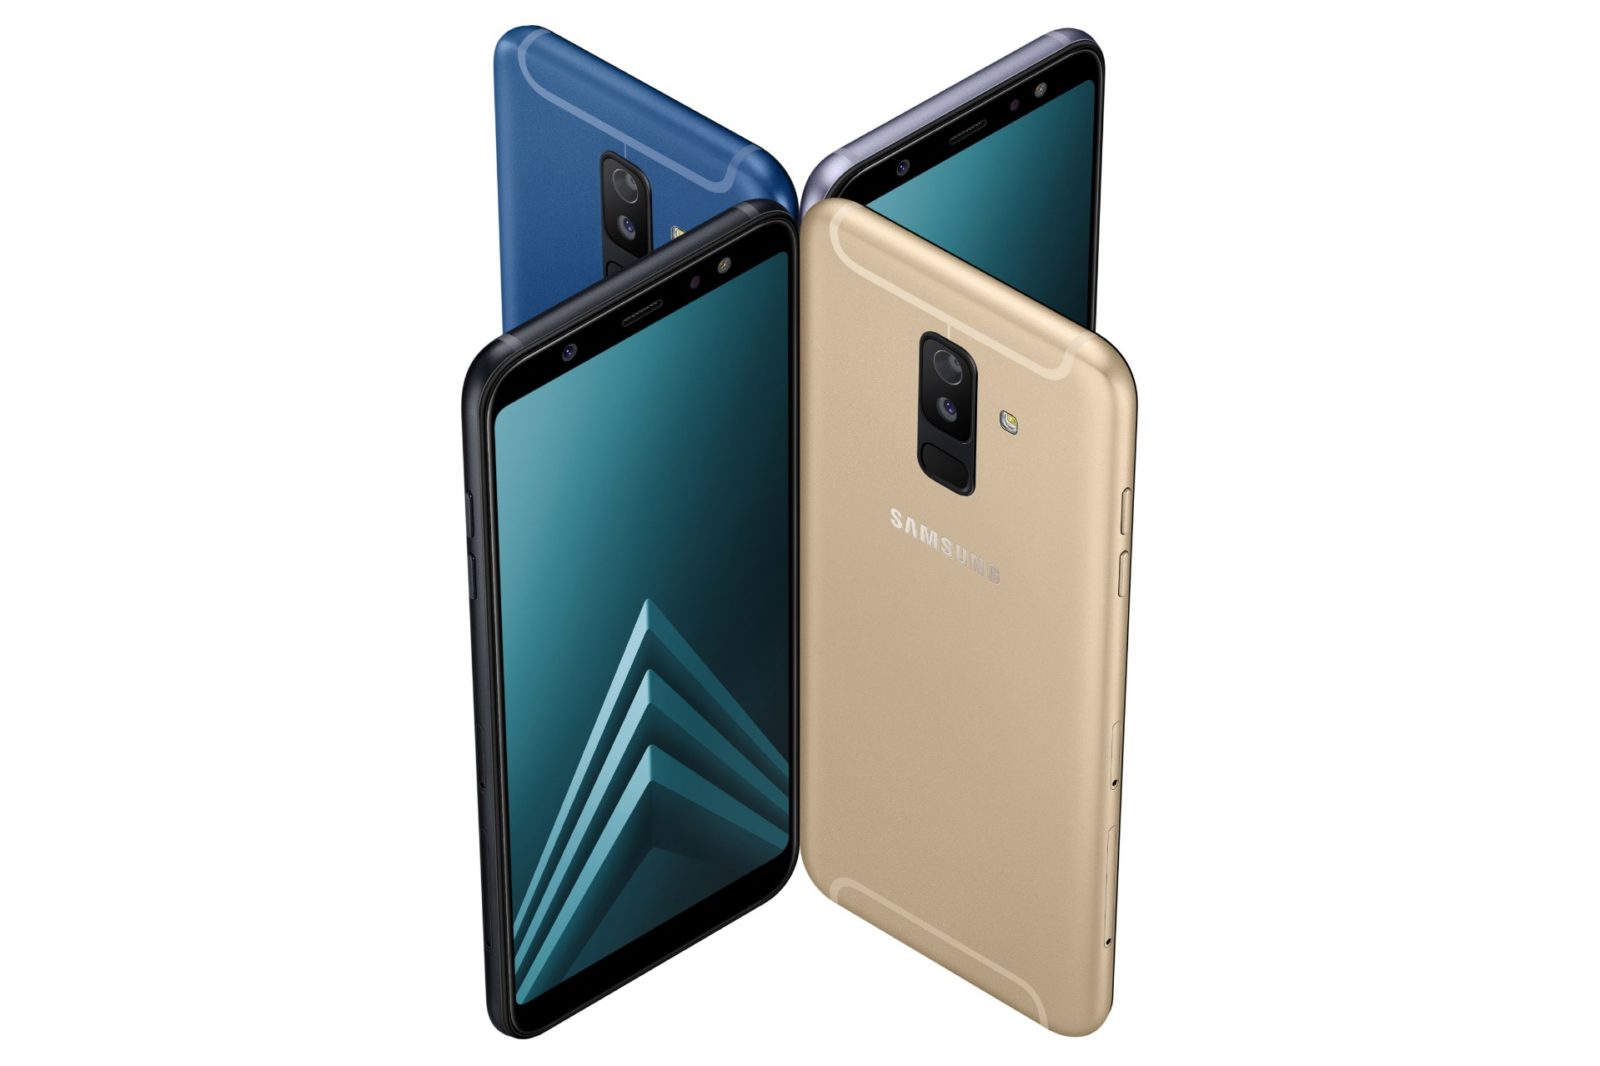 Samsung Galaxy A6 Plus official image 1111